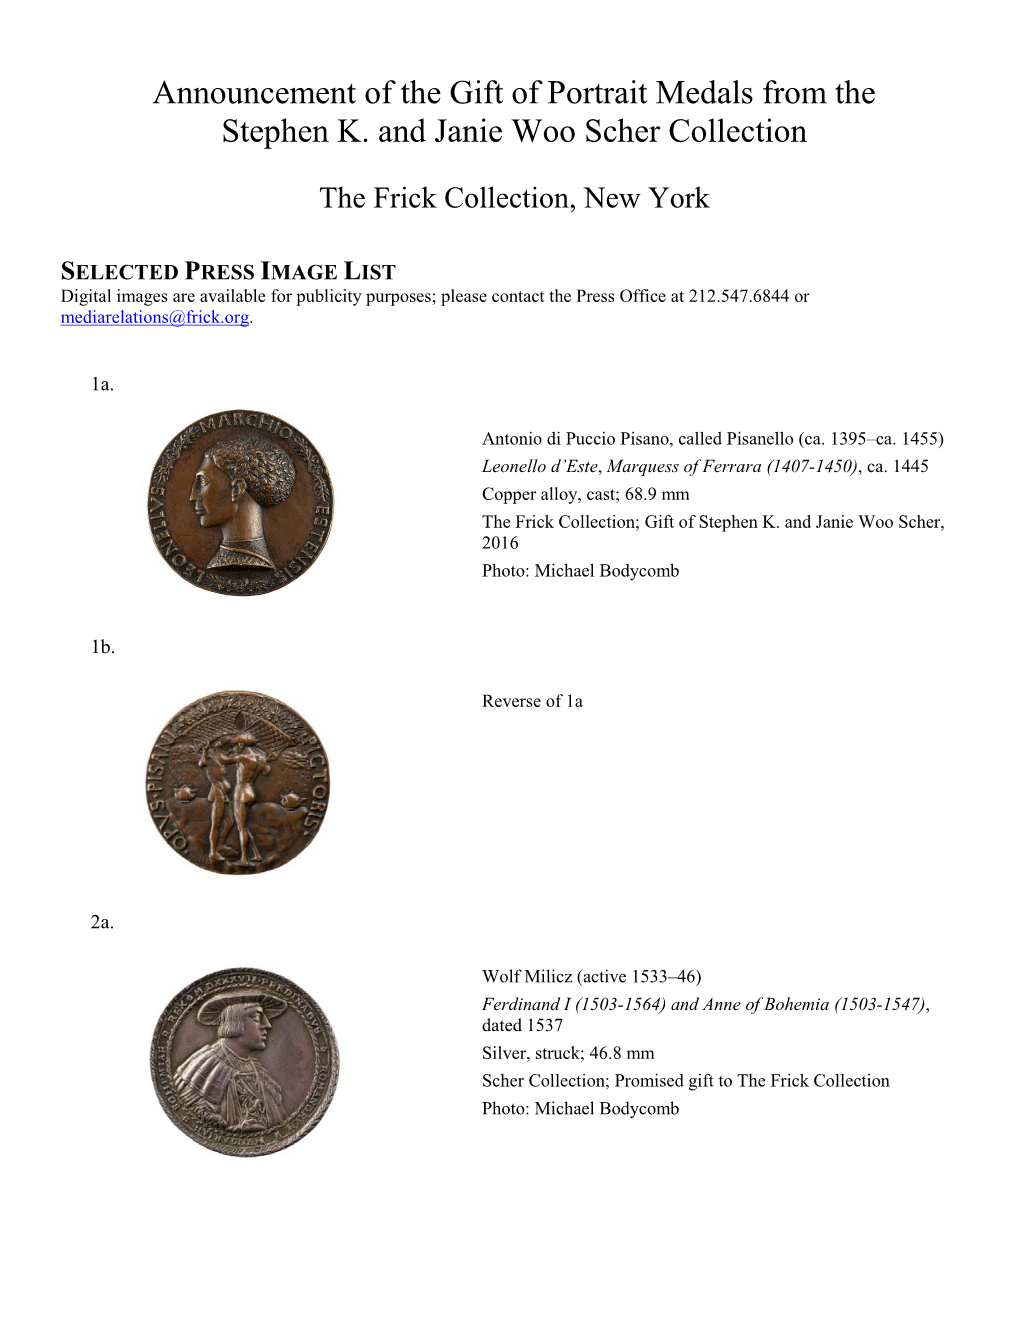 Announcement of the Gift of Portrait Medals from the Stephen K. and Janie Woo Scher Collection